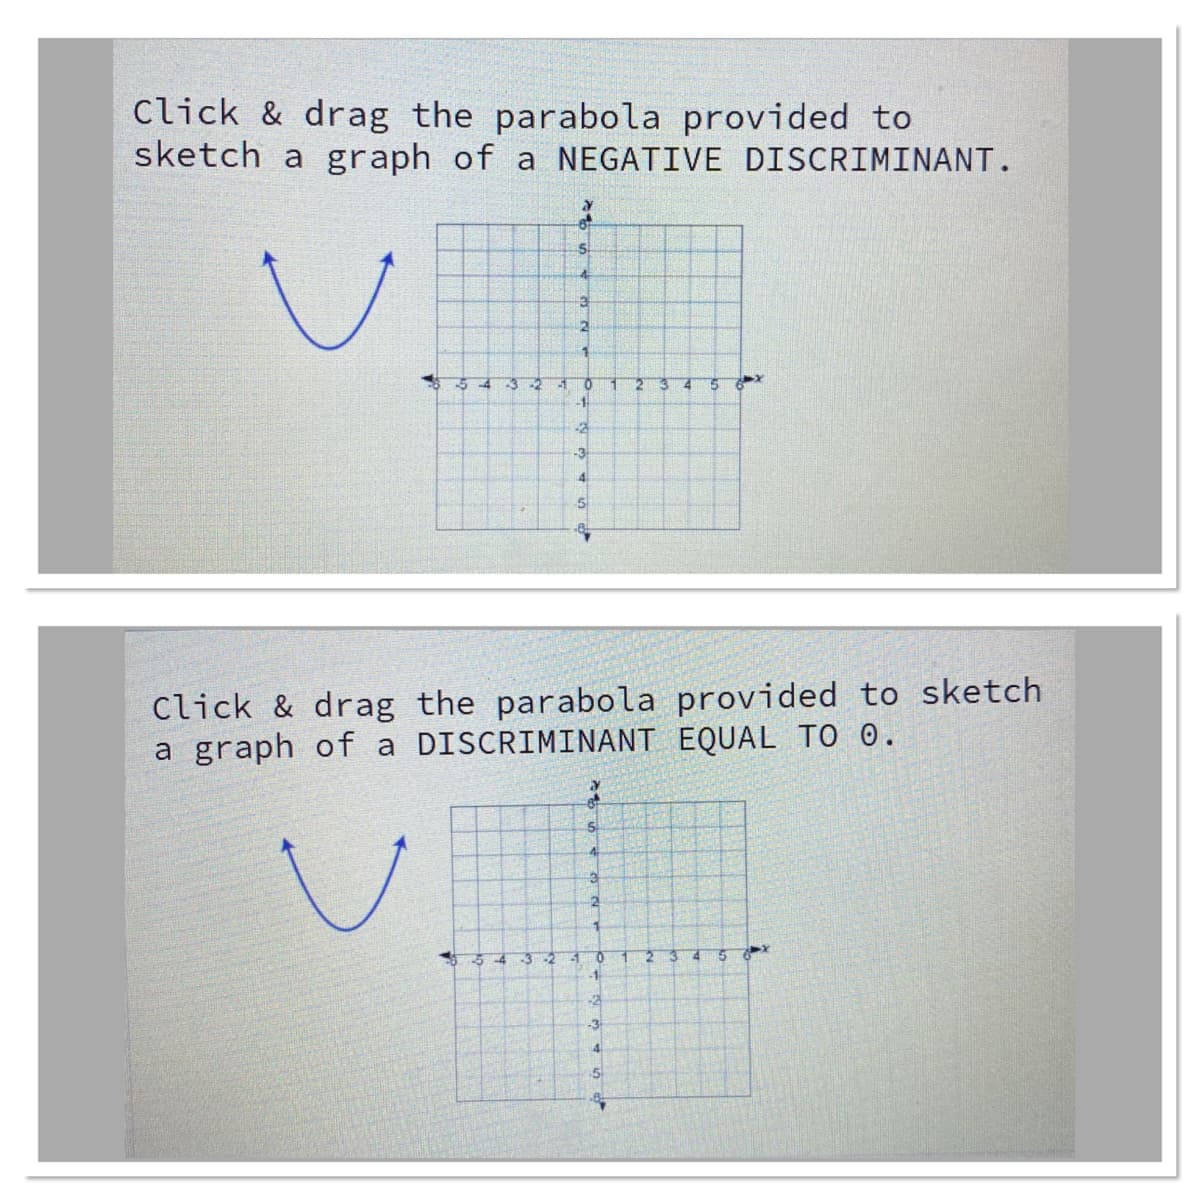 Click & drag the parabola provided to
sketch a graph of a NEGATIVE DISCRIMINANT.
-2
4.
-1-
-2
-3
4
Click & drag the parabola provided to sketch
a graph of a DISCRIMINANT EQUAL TO O.
5.
-3-2
-1
-1
-3
4.
